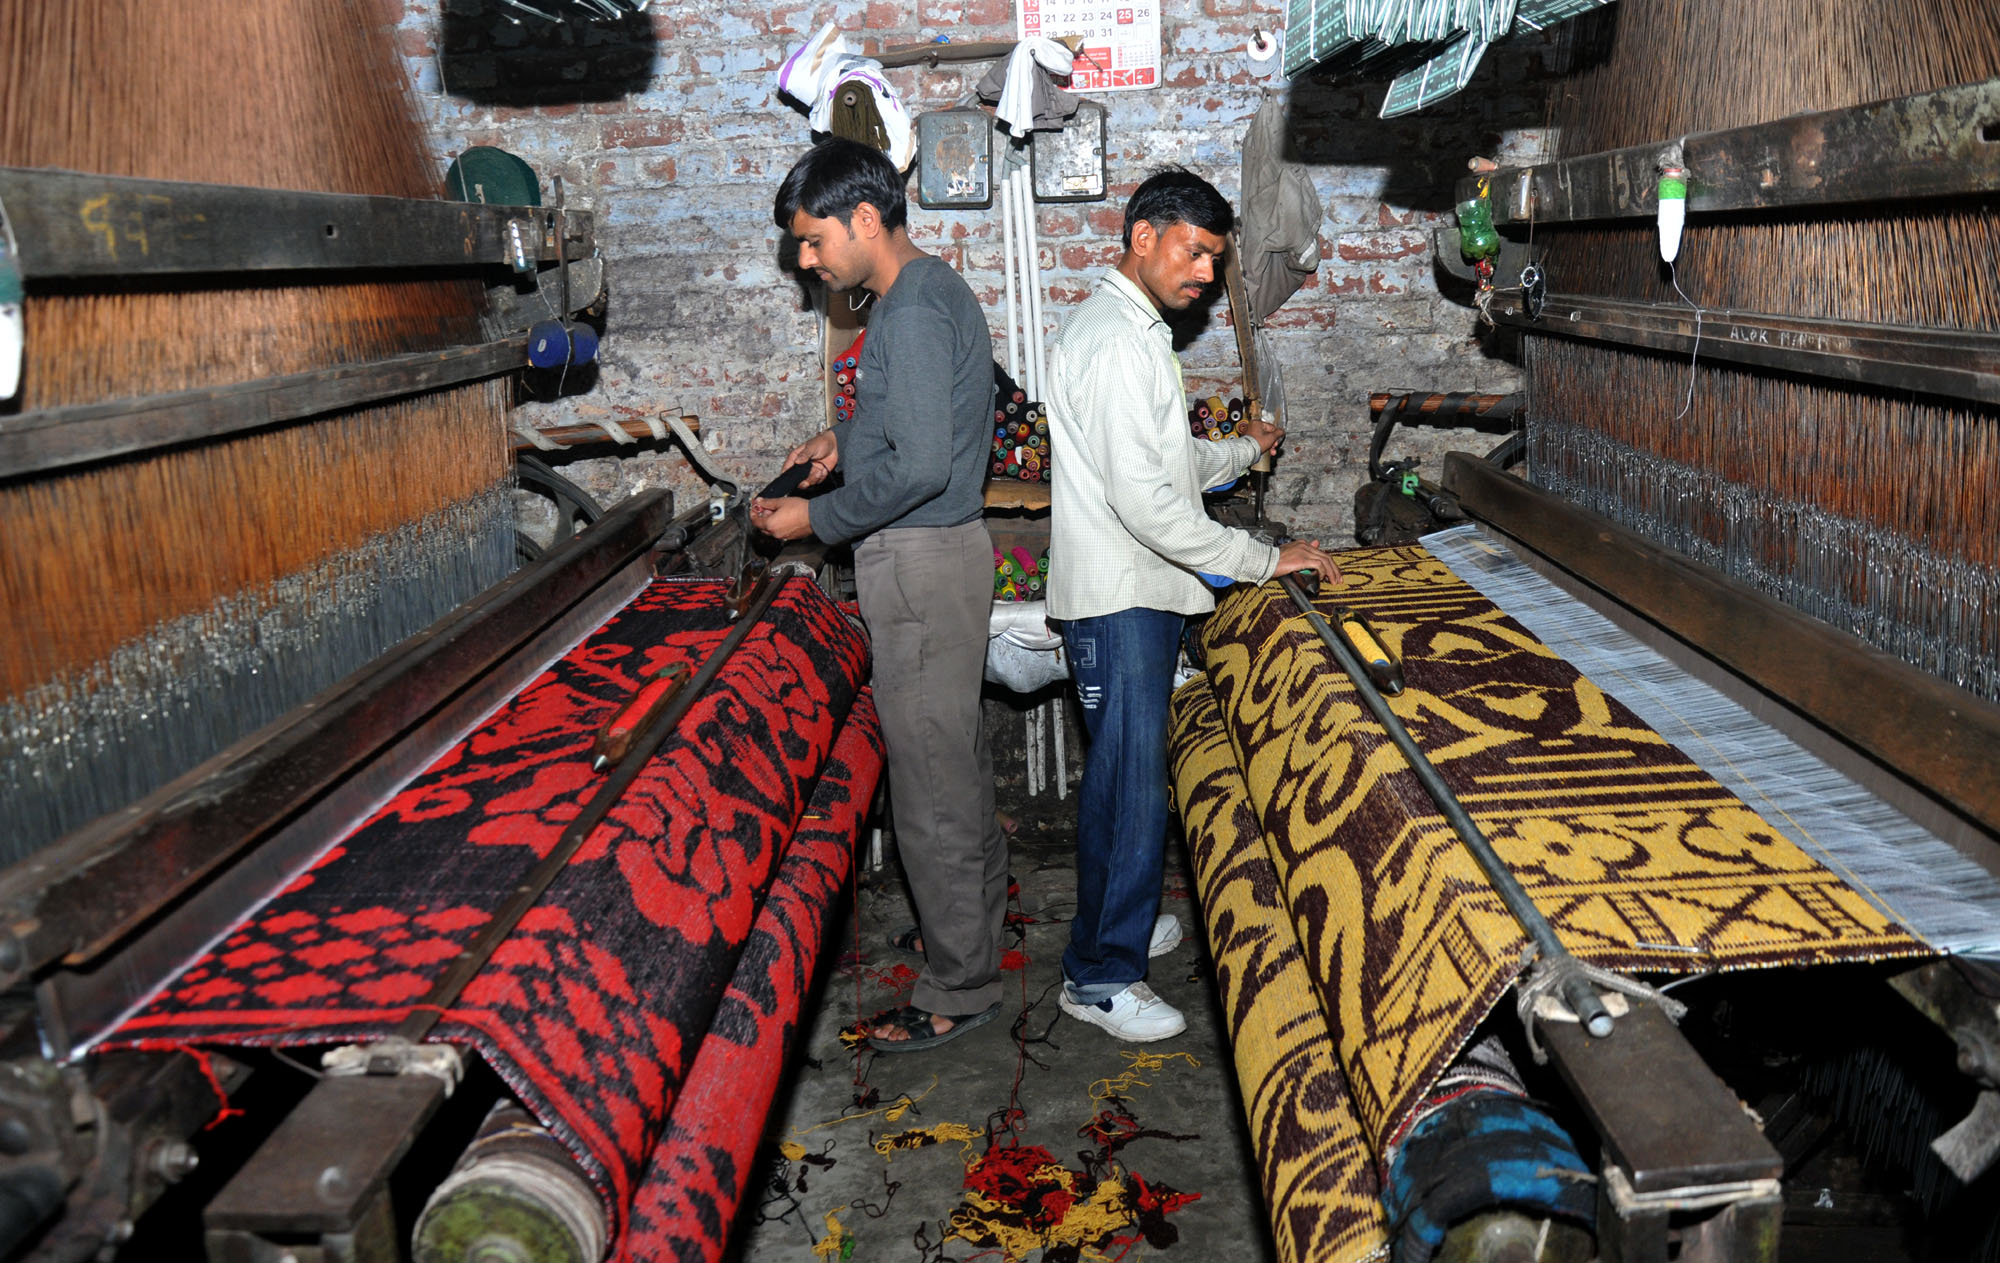 Panipat blanket industry hit by inflation, stares at crisis